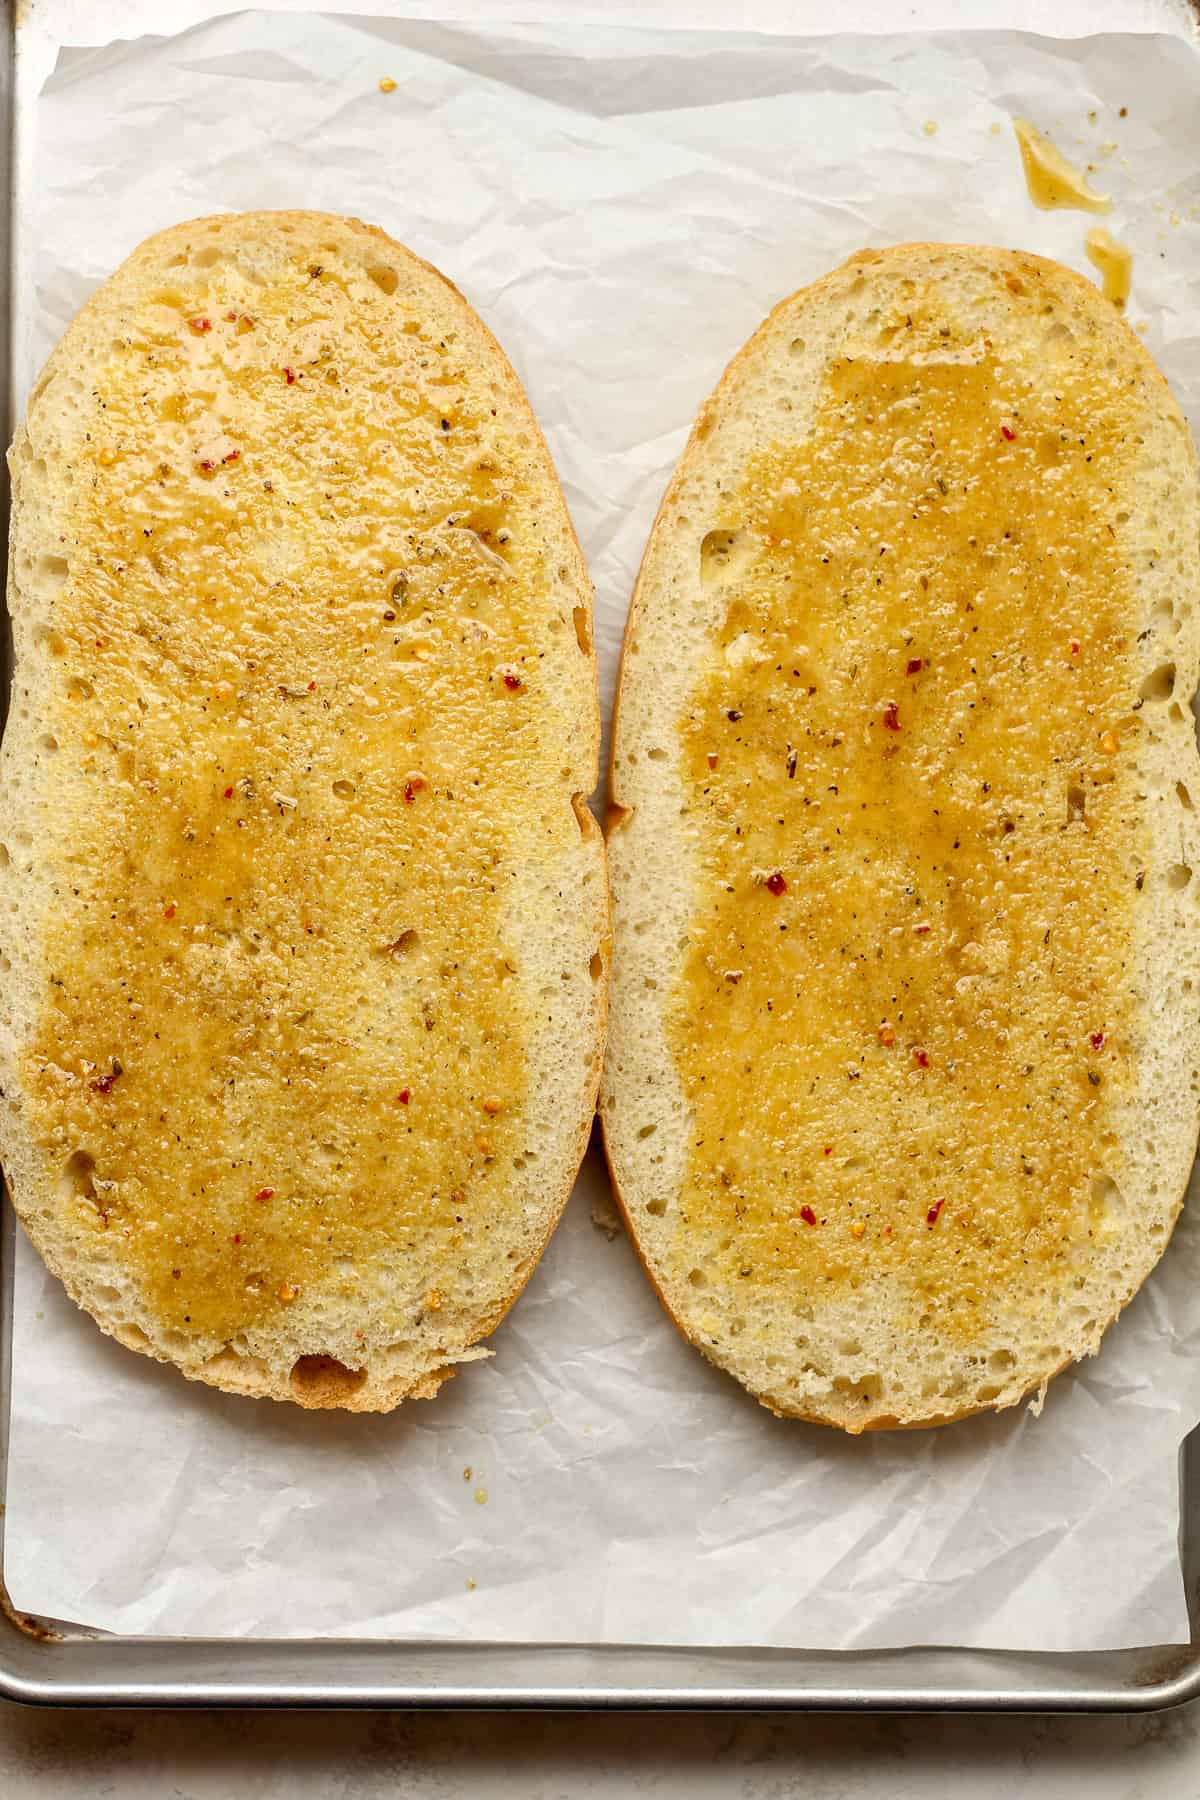 The two sides of the bread with Italian dressing brushed on top.